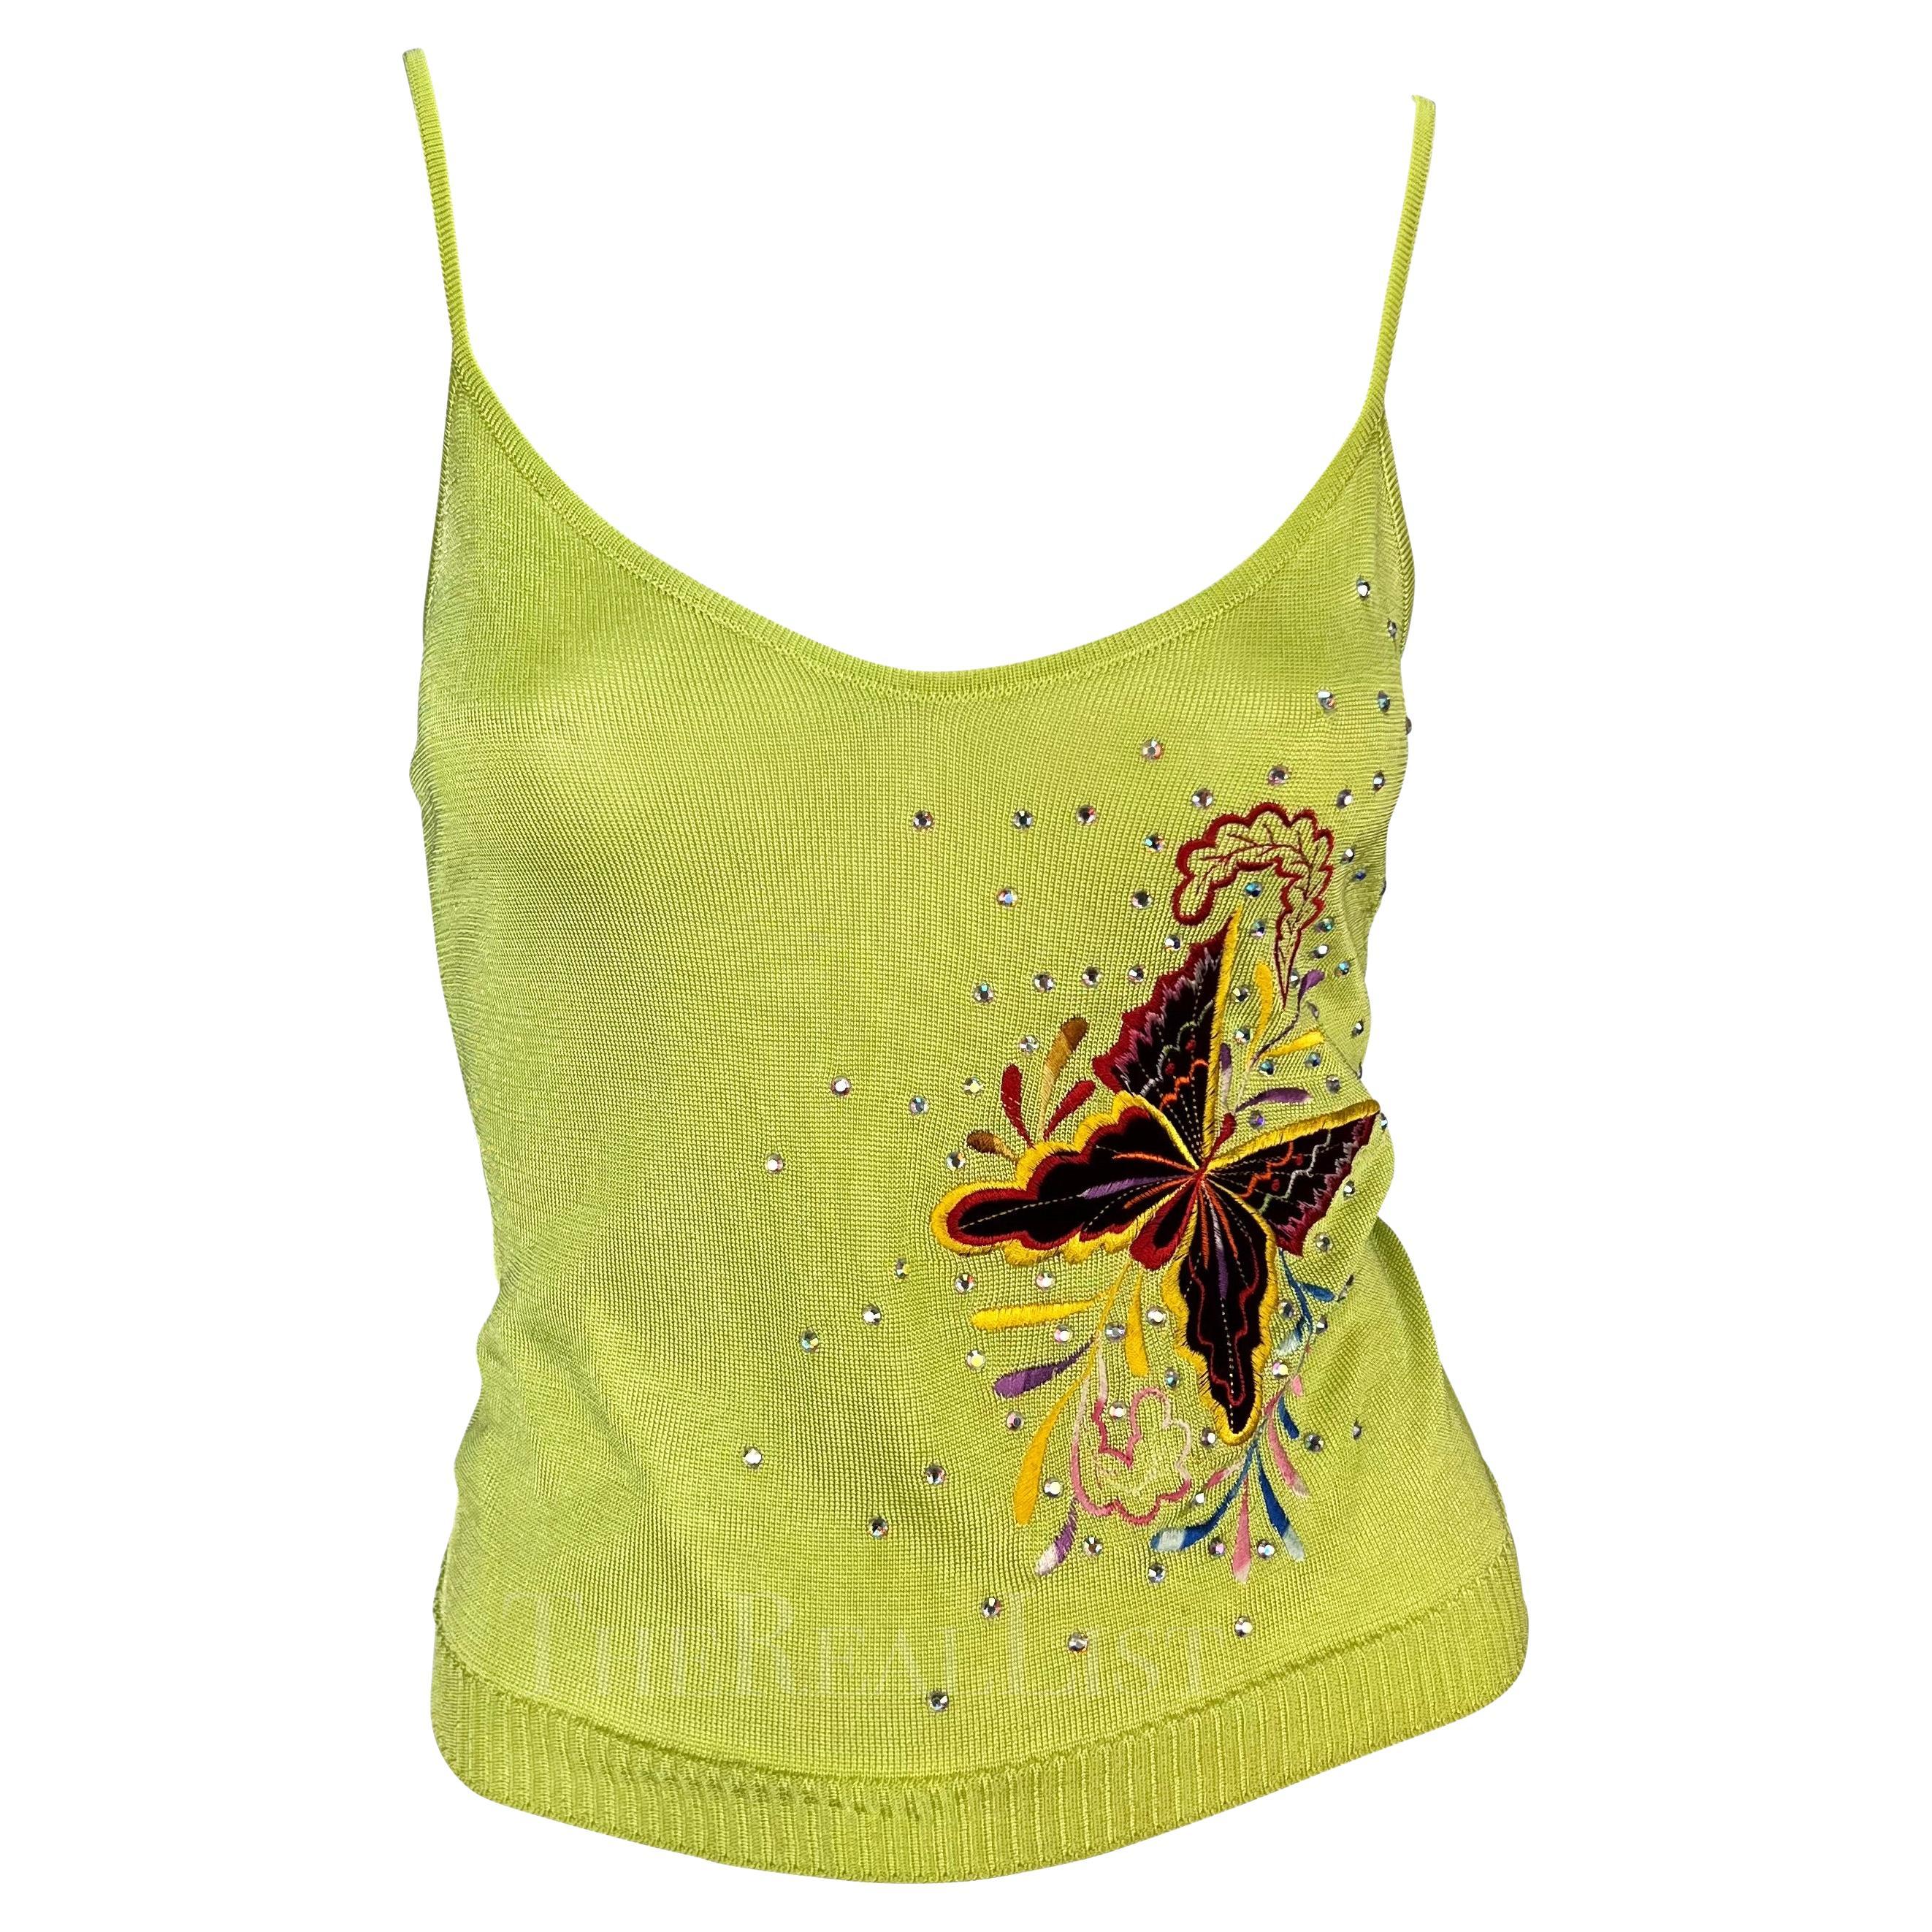 S/S 2002 Christian Dior by John Galliano Butterfly Embellished Knit Tank Top  In Excellent Condition In West Hollywood, CA